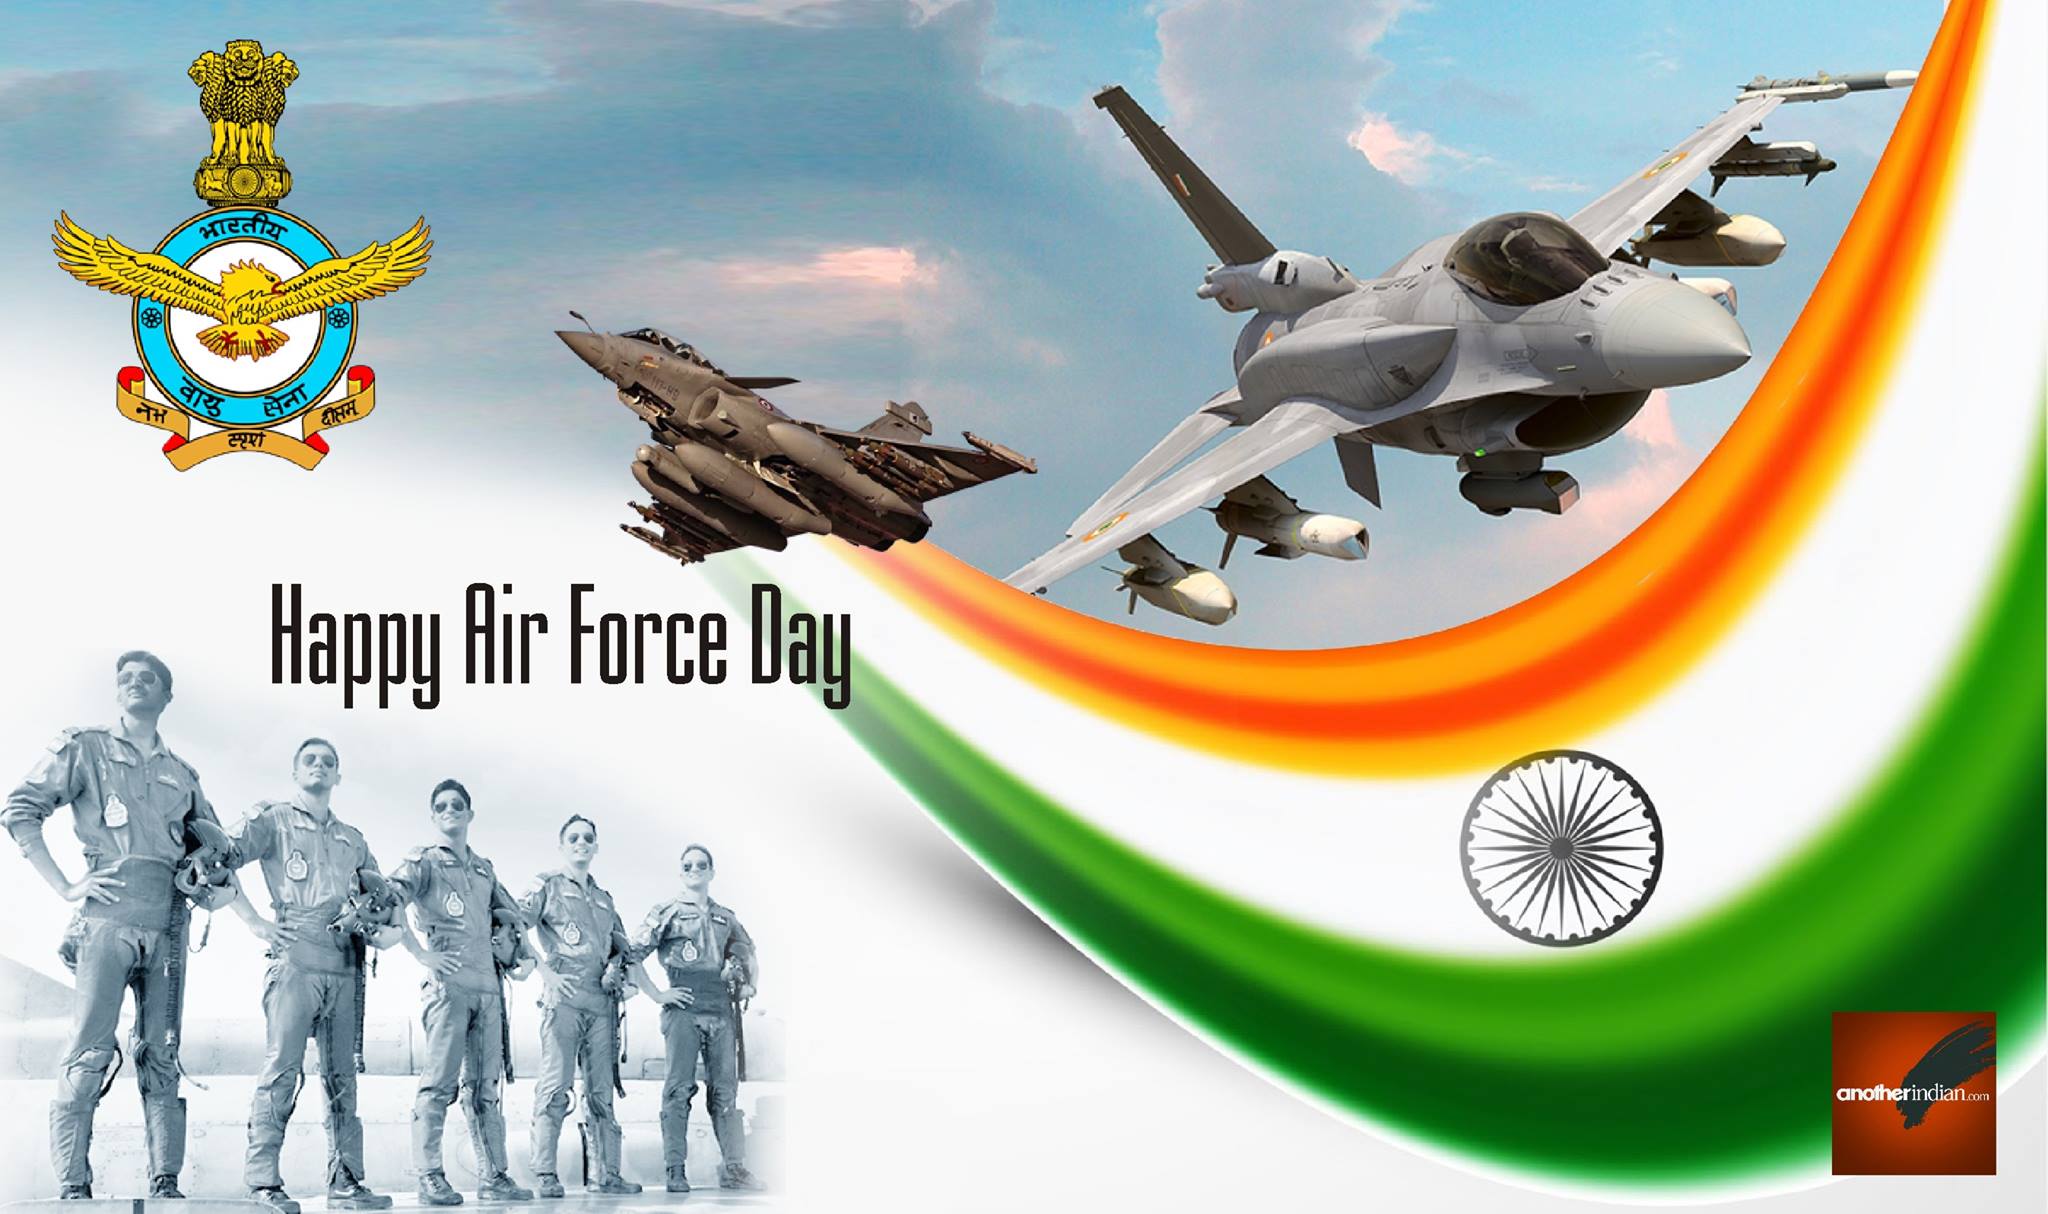 Celebrating Indian Air Force Day with Some mind blowing facts about